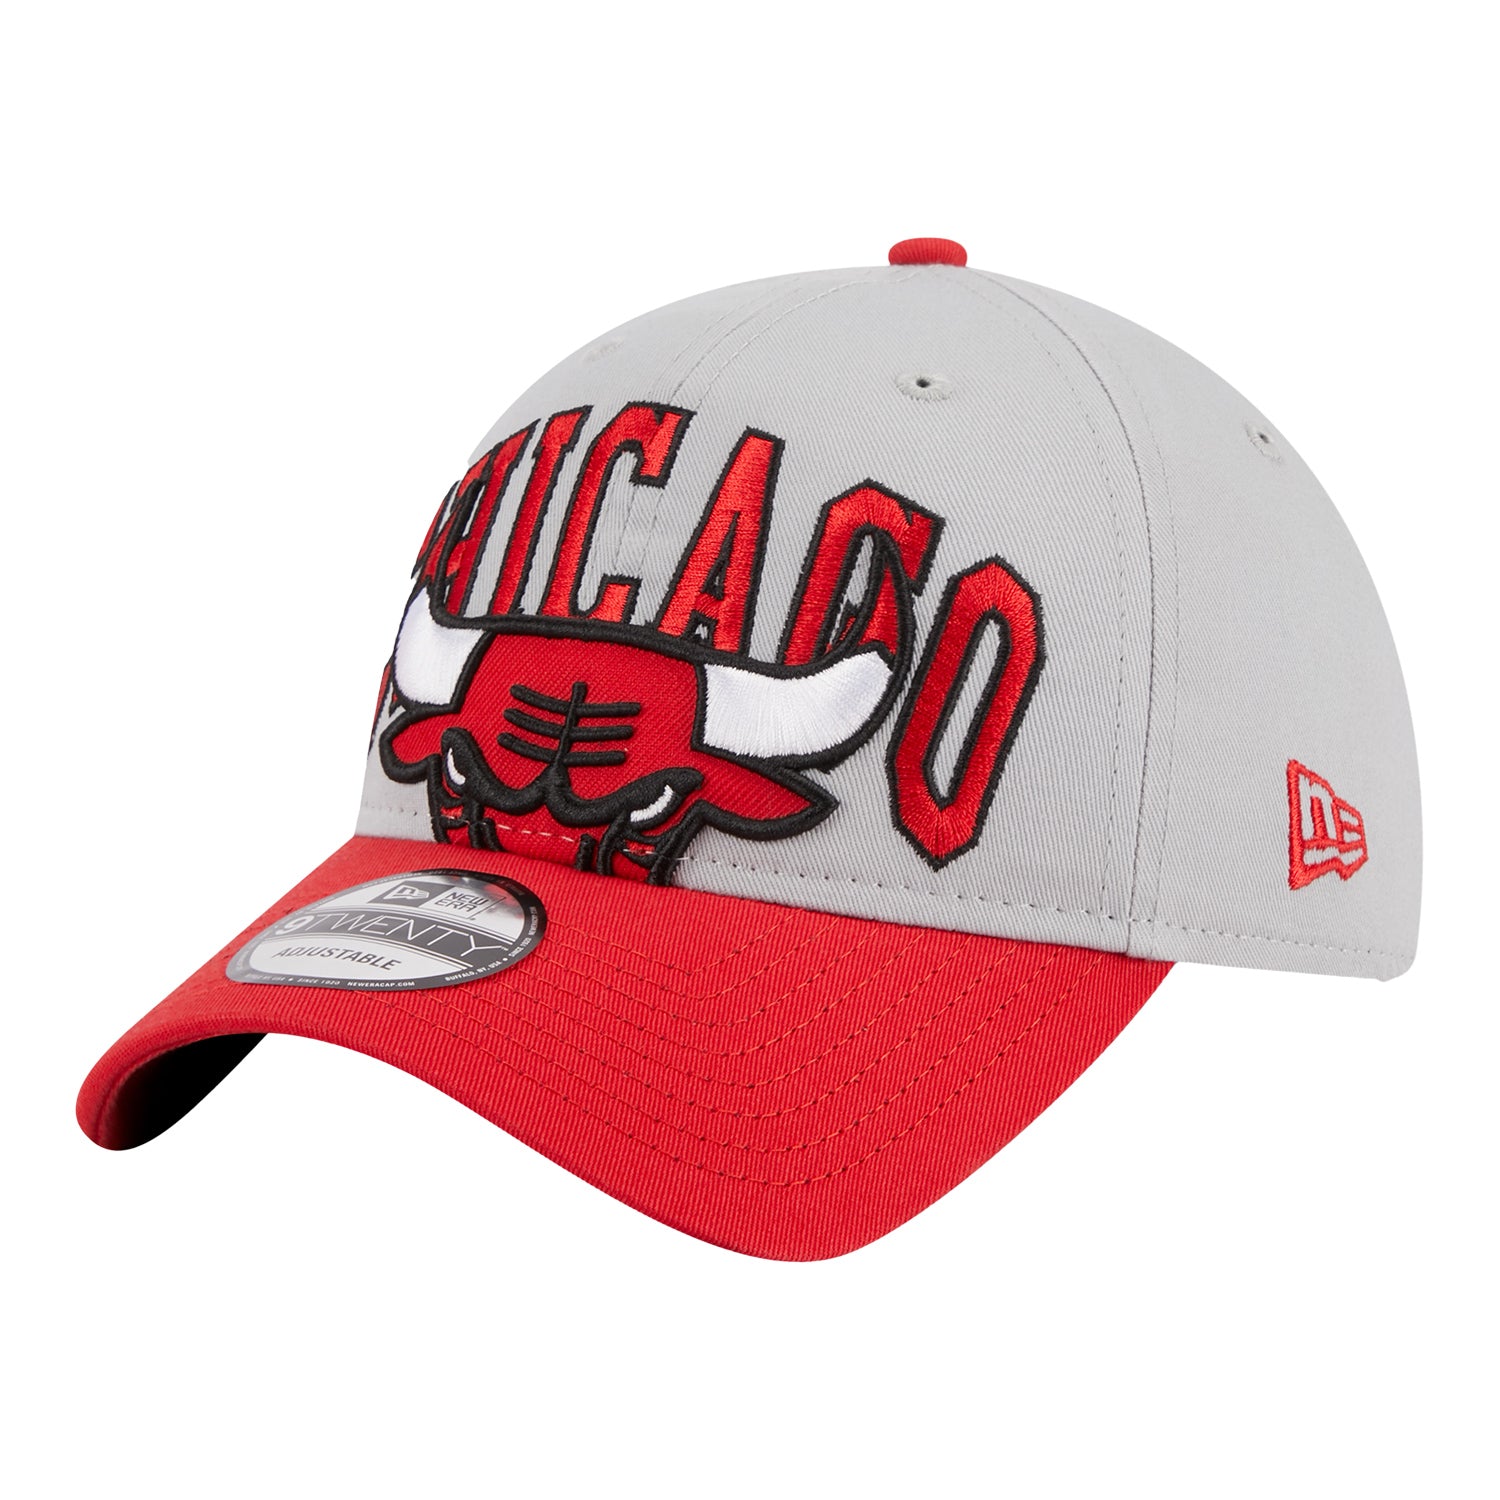 Chicago Bulls 23 Adjustable Tip Off Hat - grey and red - front view